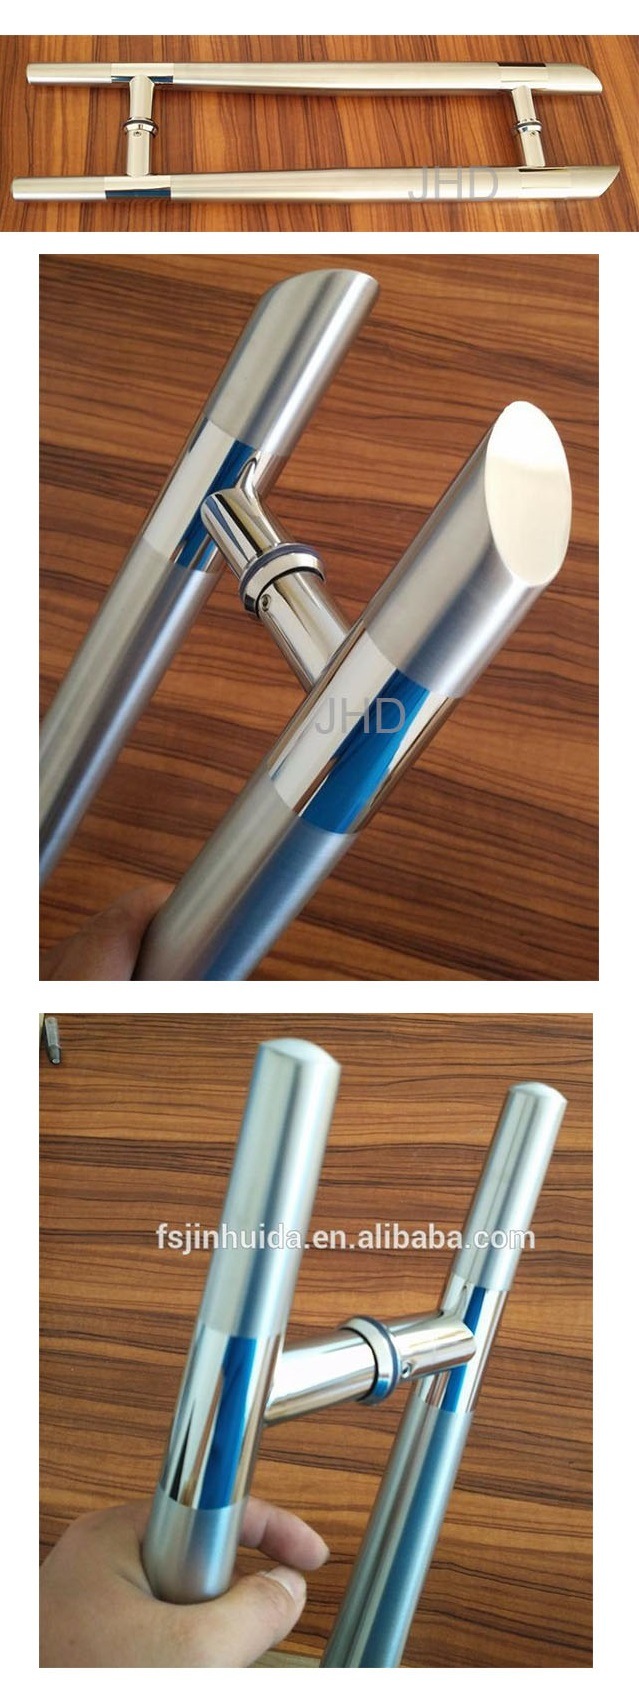 Gaoyao New Design Stainless Steel Tempered Glass Door Pull Handle